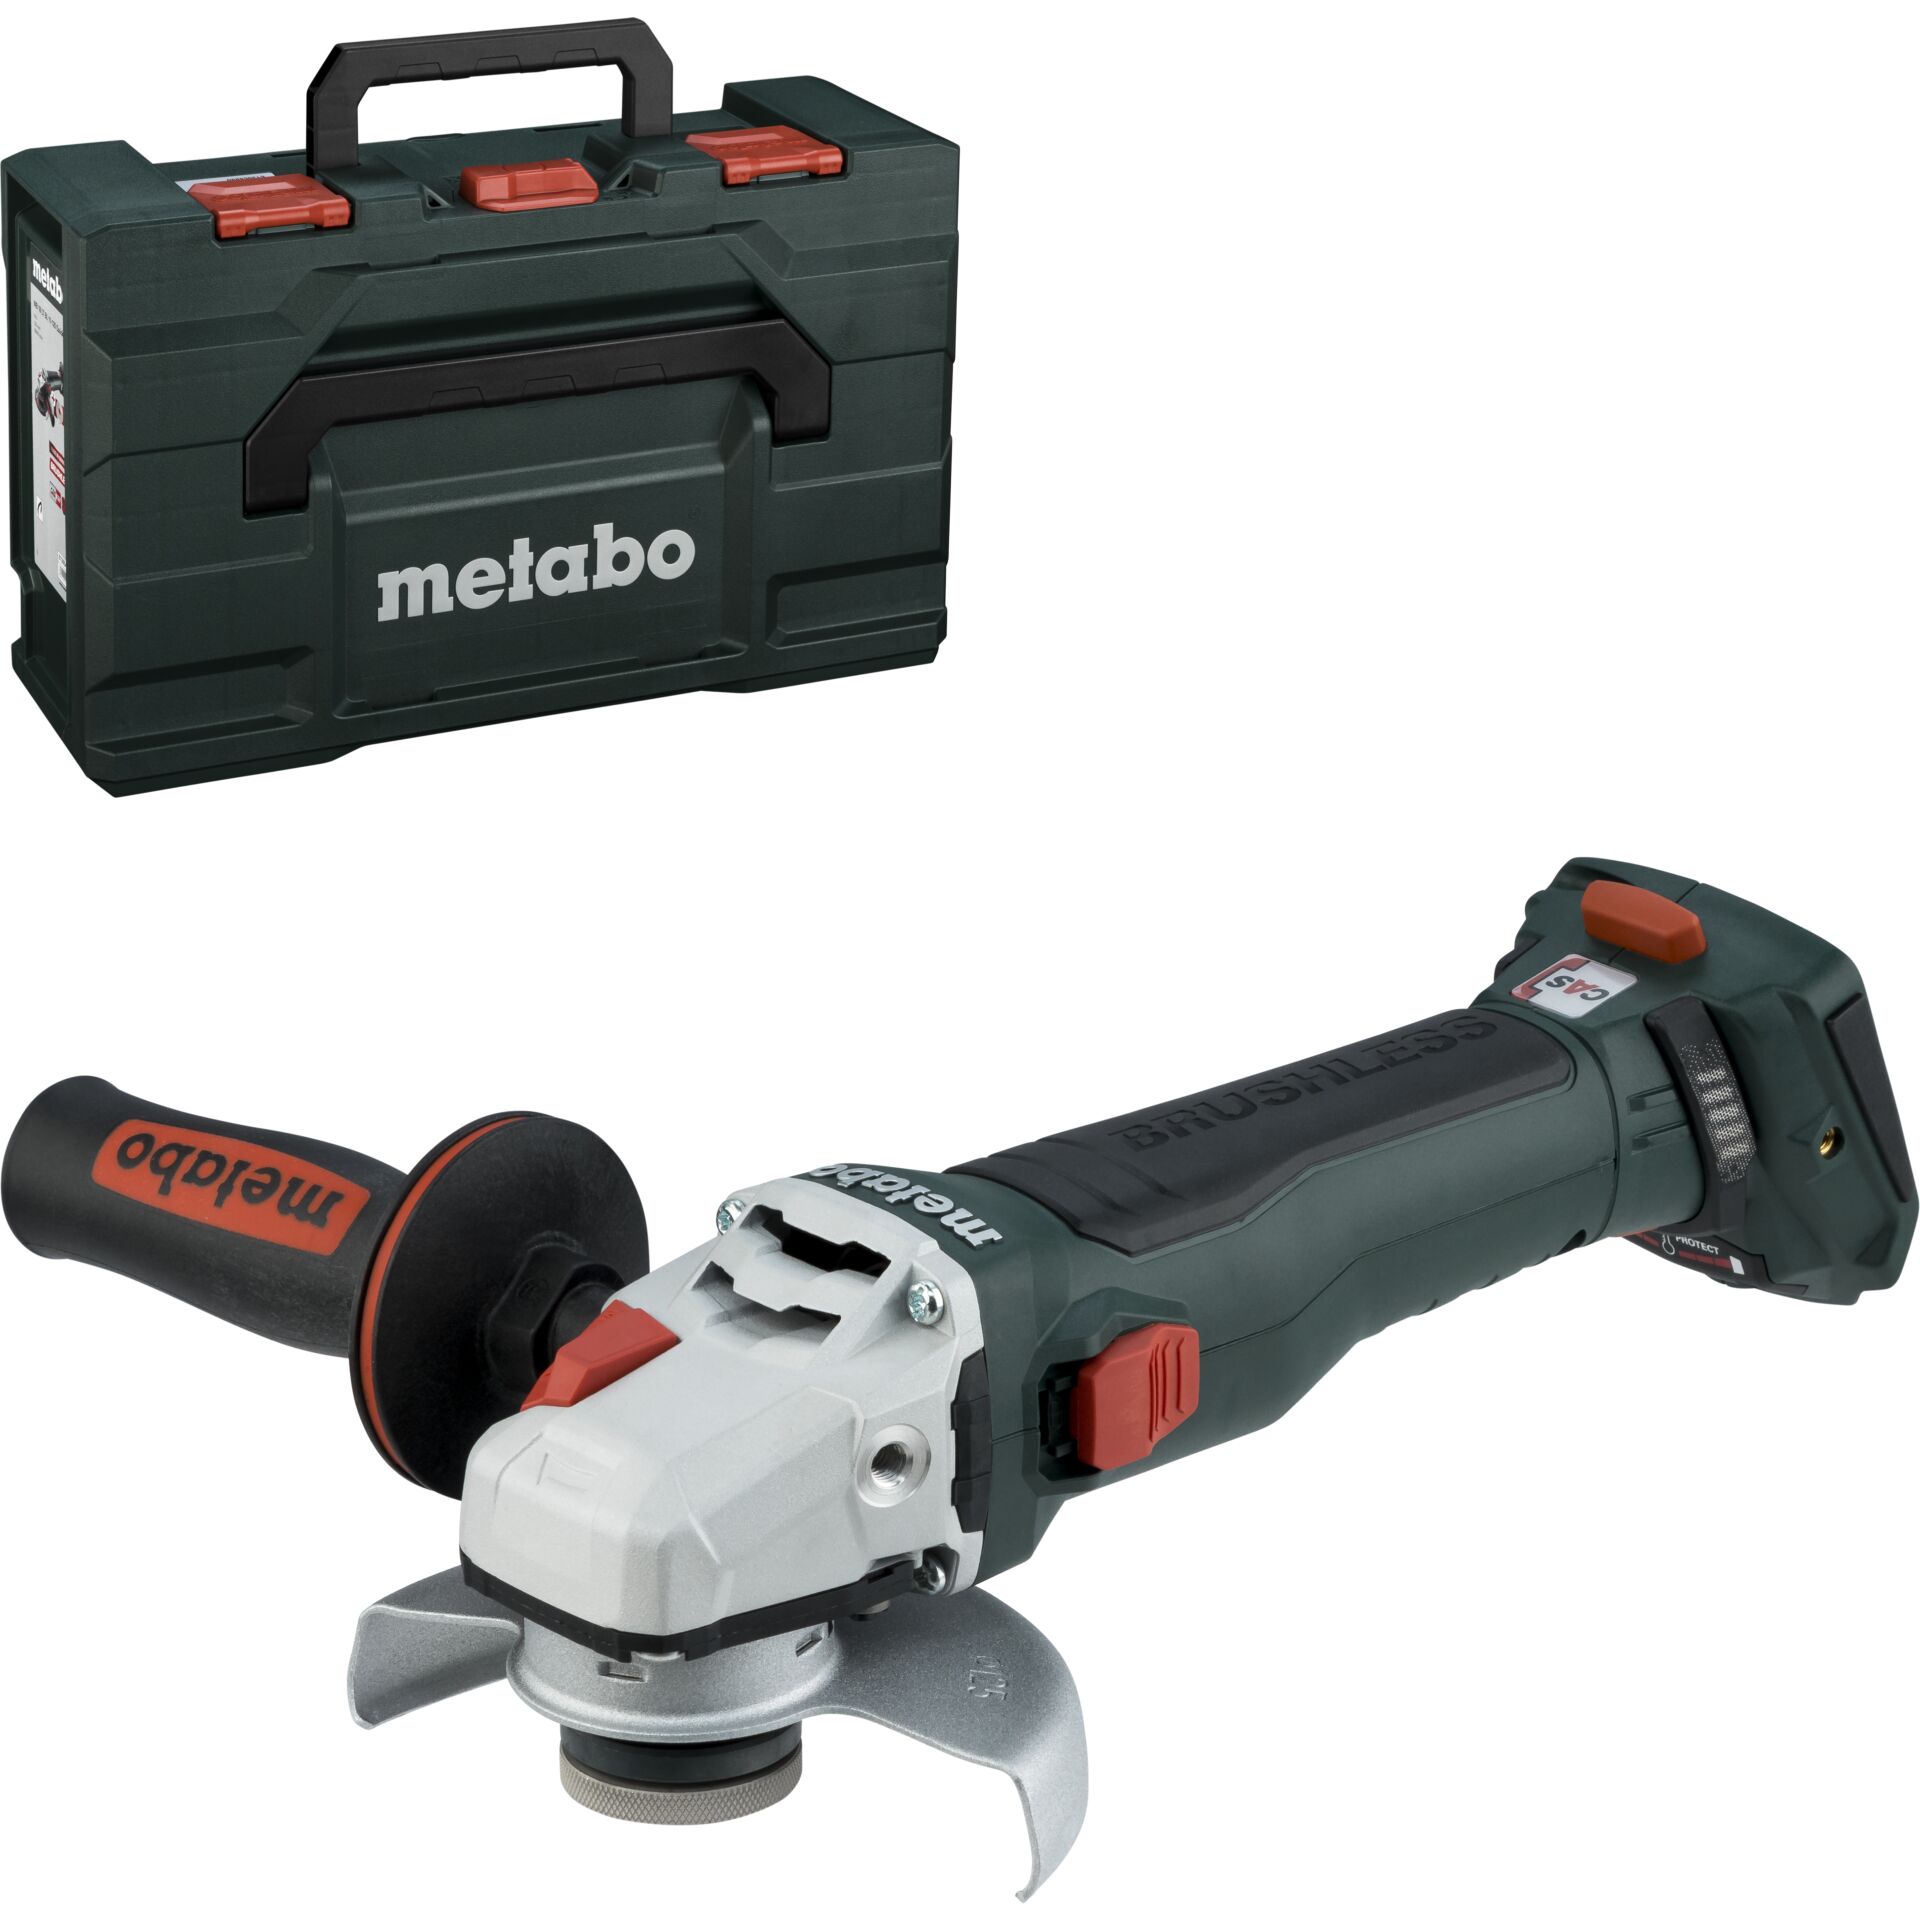 Metabo 613054840 WB 18 LT BL 11-125 Quick